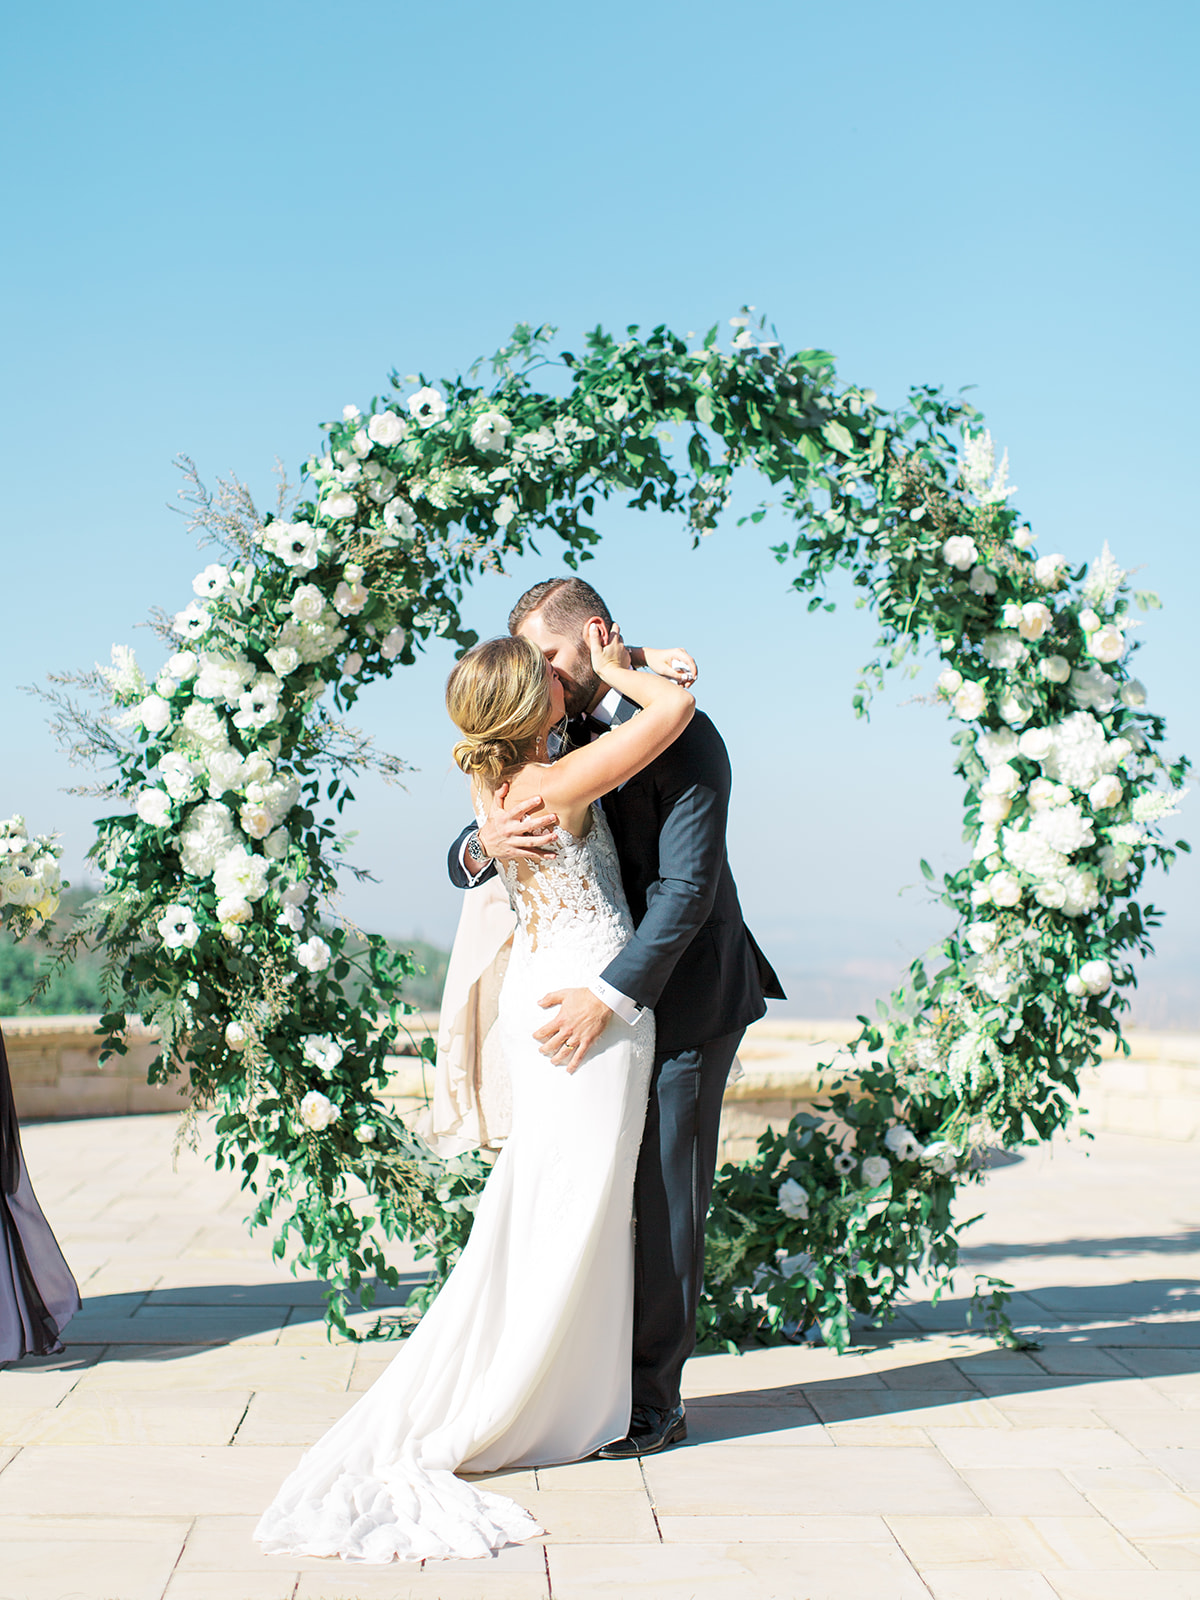 Montage Deer Valley Wedding | Classic Wedding Design | Circular Ceremony Arch | Mountain Wedding | Michelle Leo Events | Utah Event Planner | Kenzie Victory Photography